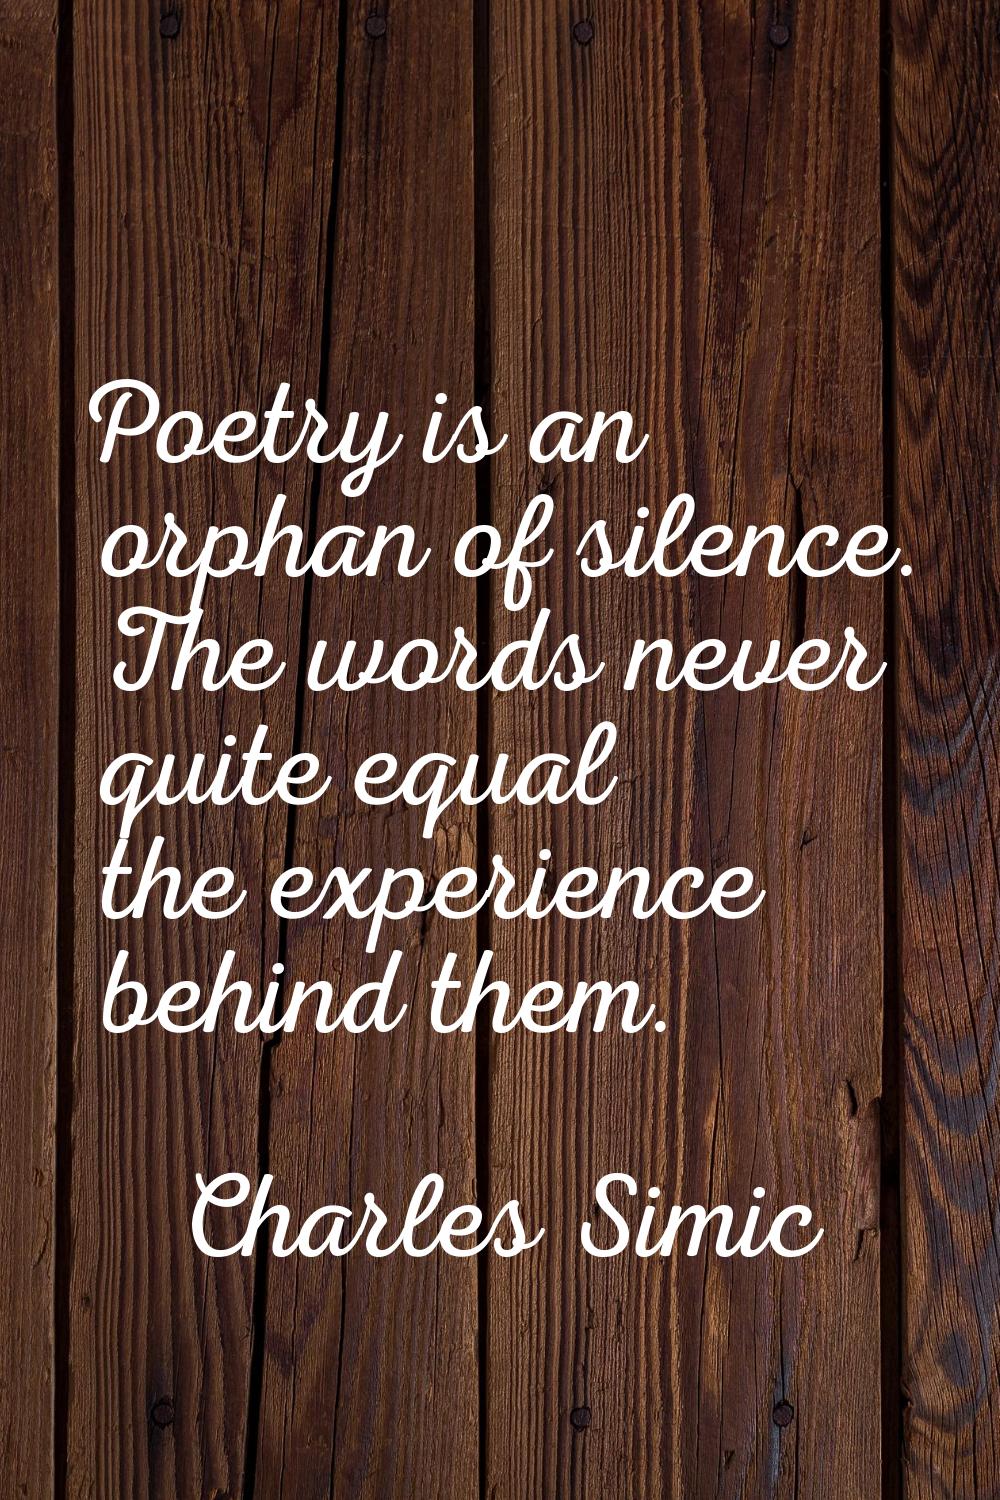 Poetry is an orphan of silence. The words never quite equal the experience behind them.